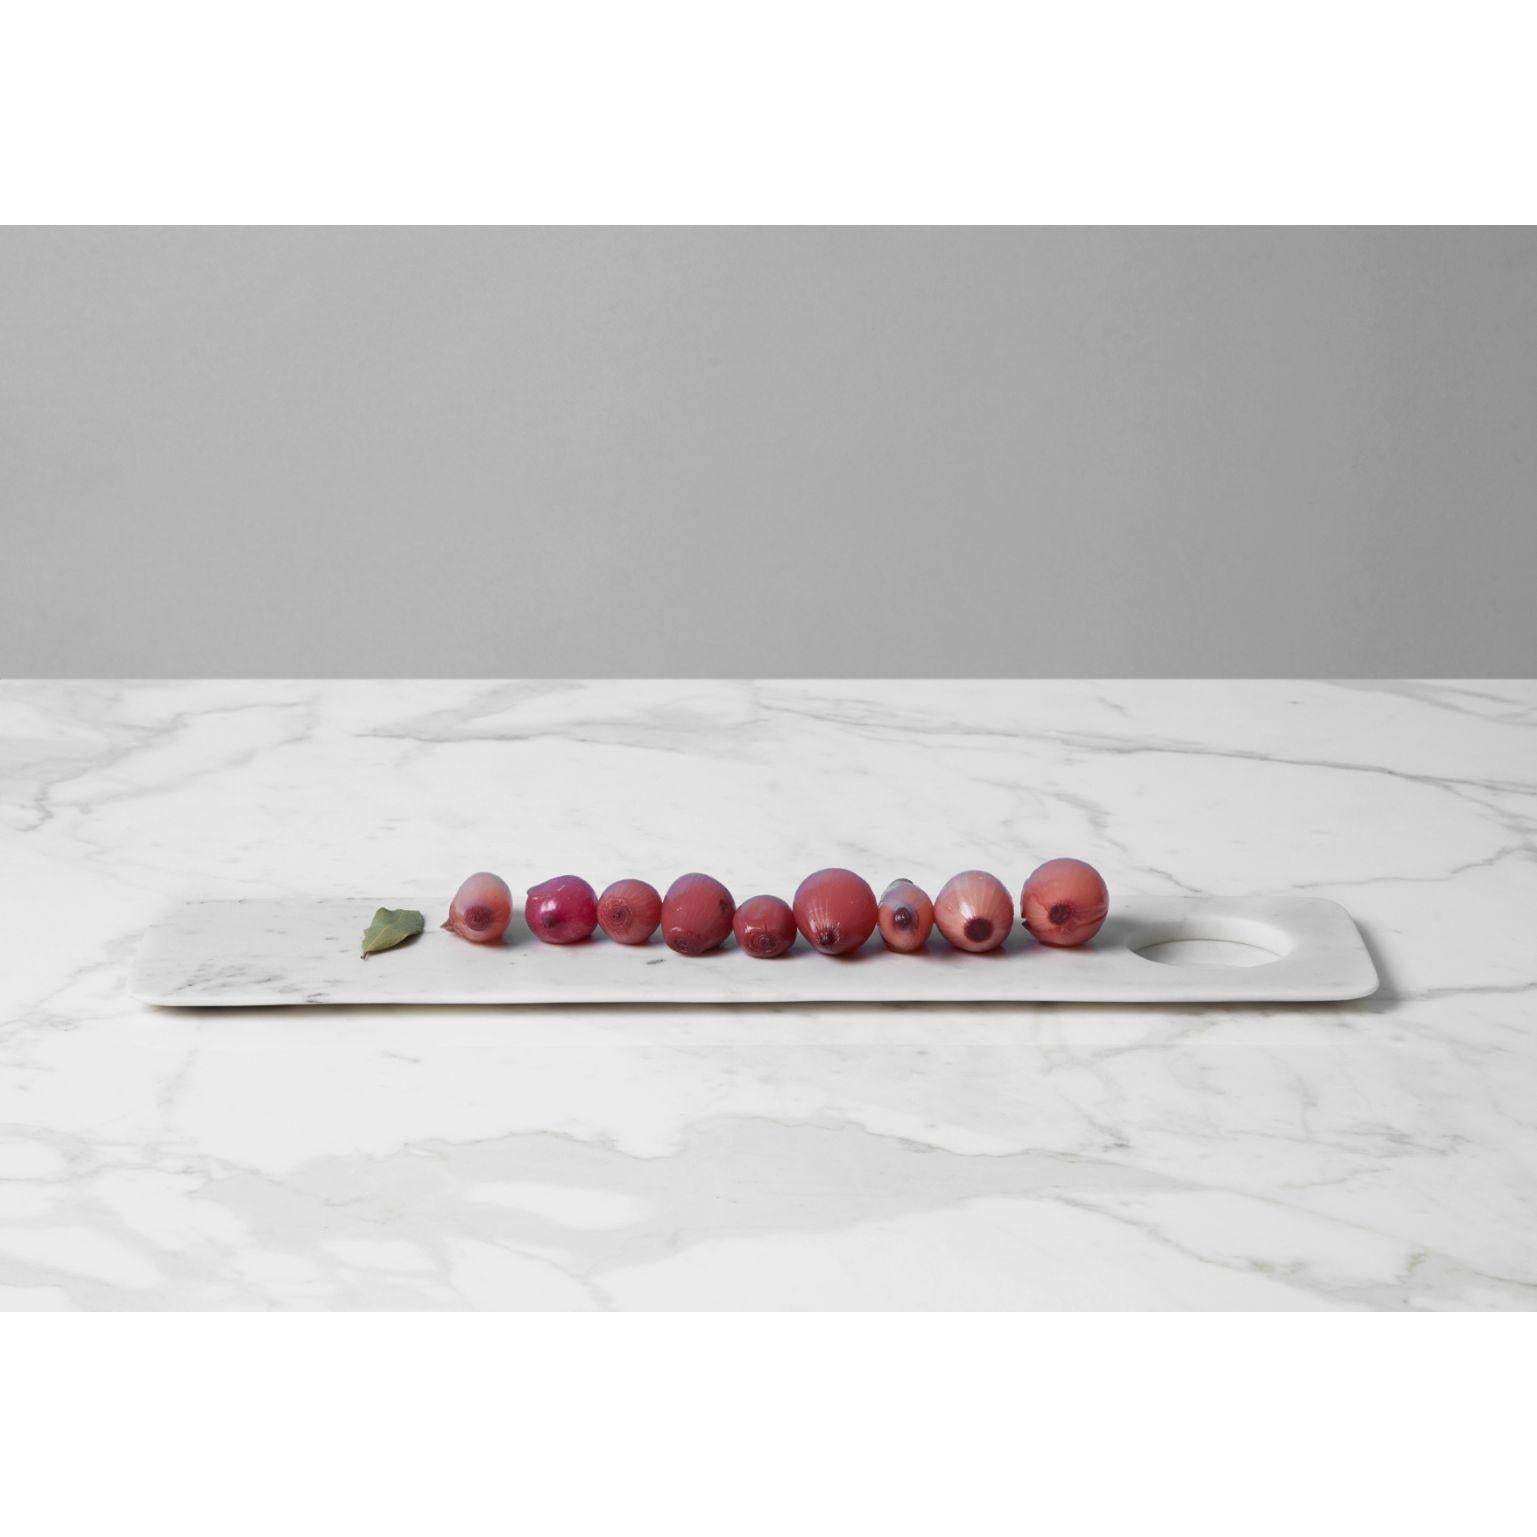 Paletta tray/chopping board by Studioformart
Total Marble Collection
Dimensions: 50 x 12 x 1 cm
Materials: Bianco Carrara 

The history of marble carving is lost in time; in one breath, it takes us back to the IV century BC, to ancient Greece